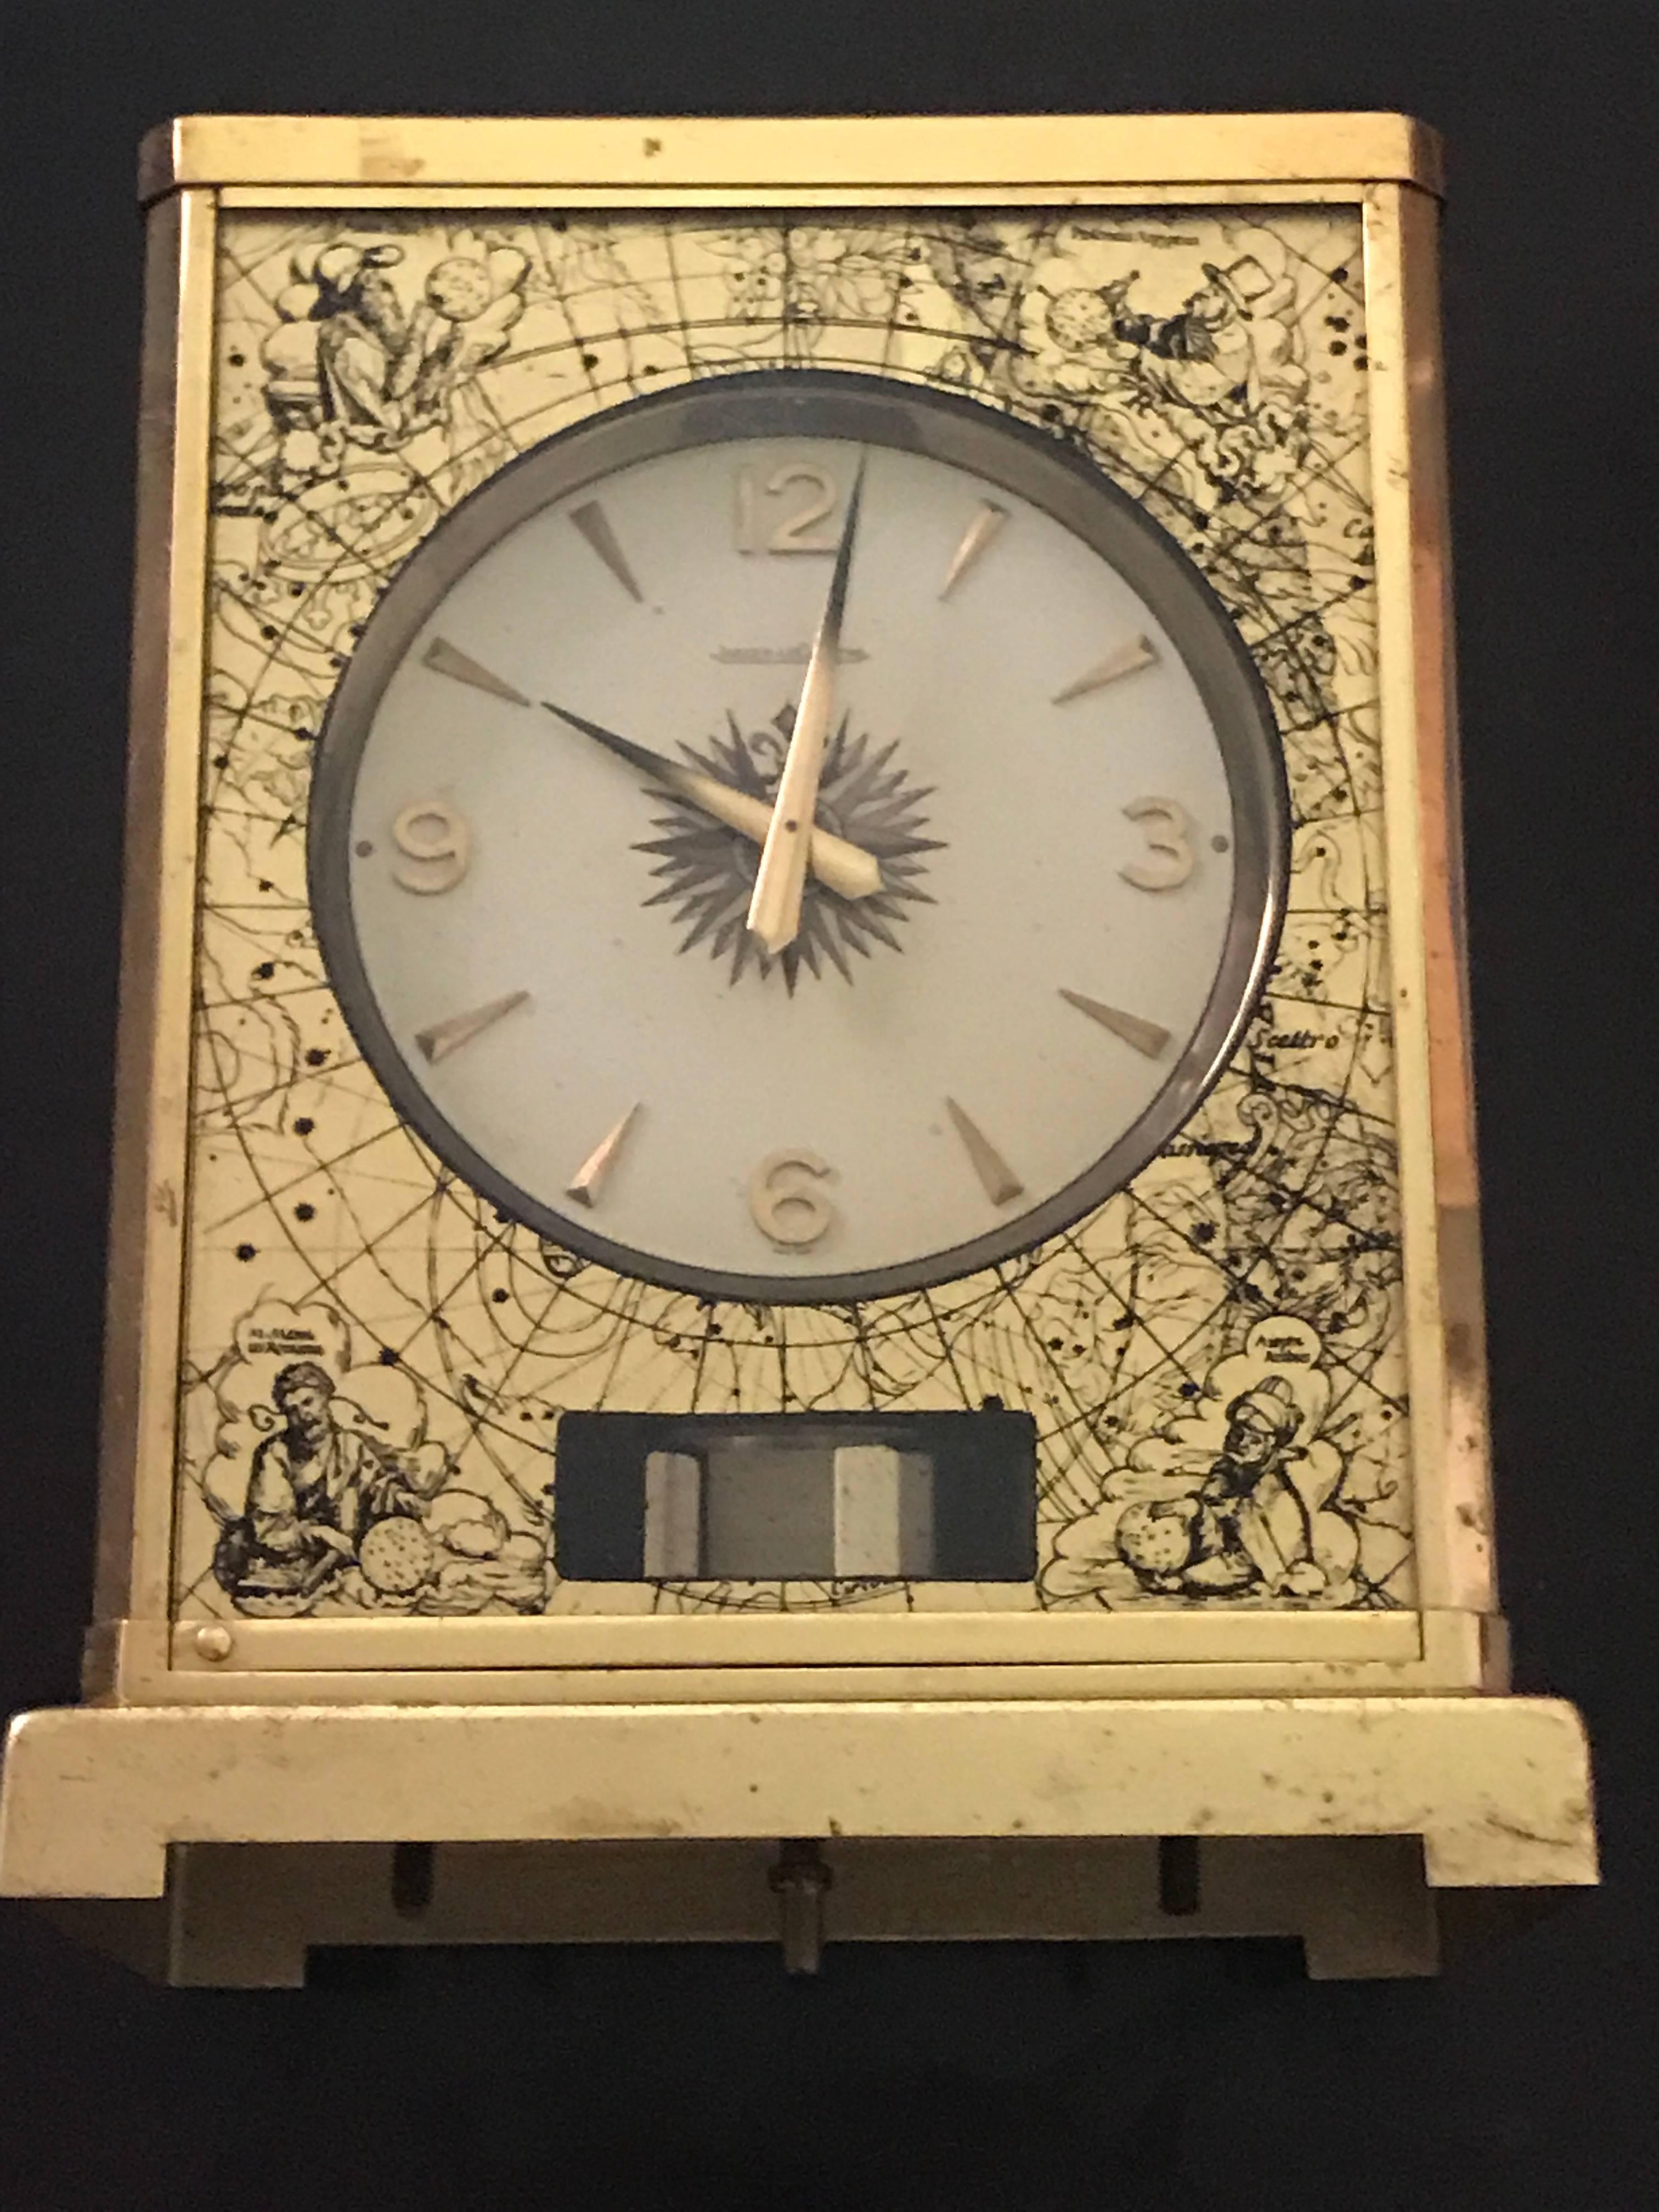 A very rare skymap 1950s Jaeger Le Coultre Classic model Swiss Atmos clock with box, 526/5, circa 1950.
Golden brass case with pictures of the astronomical sky according to ancient Greeks. It comes with its original white parchment and blue velvet